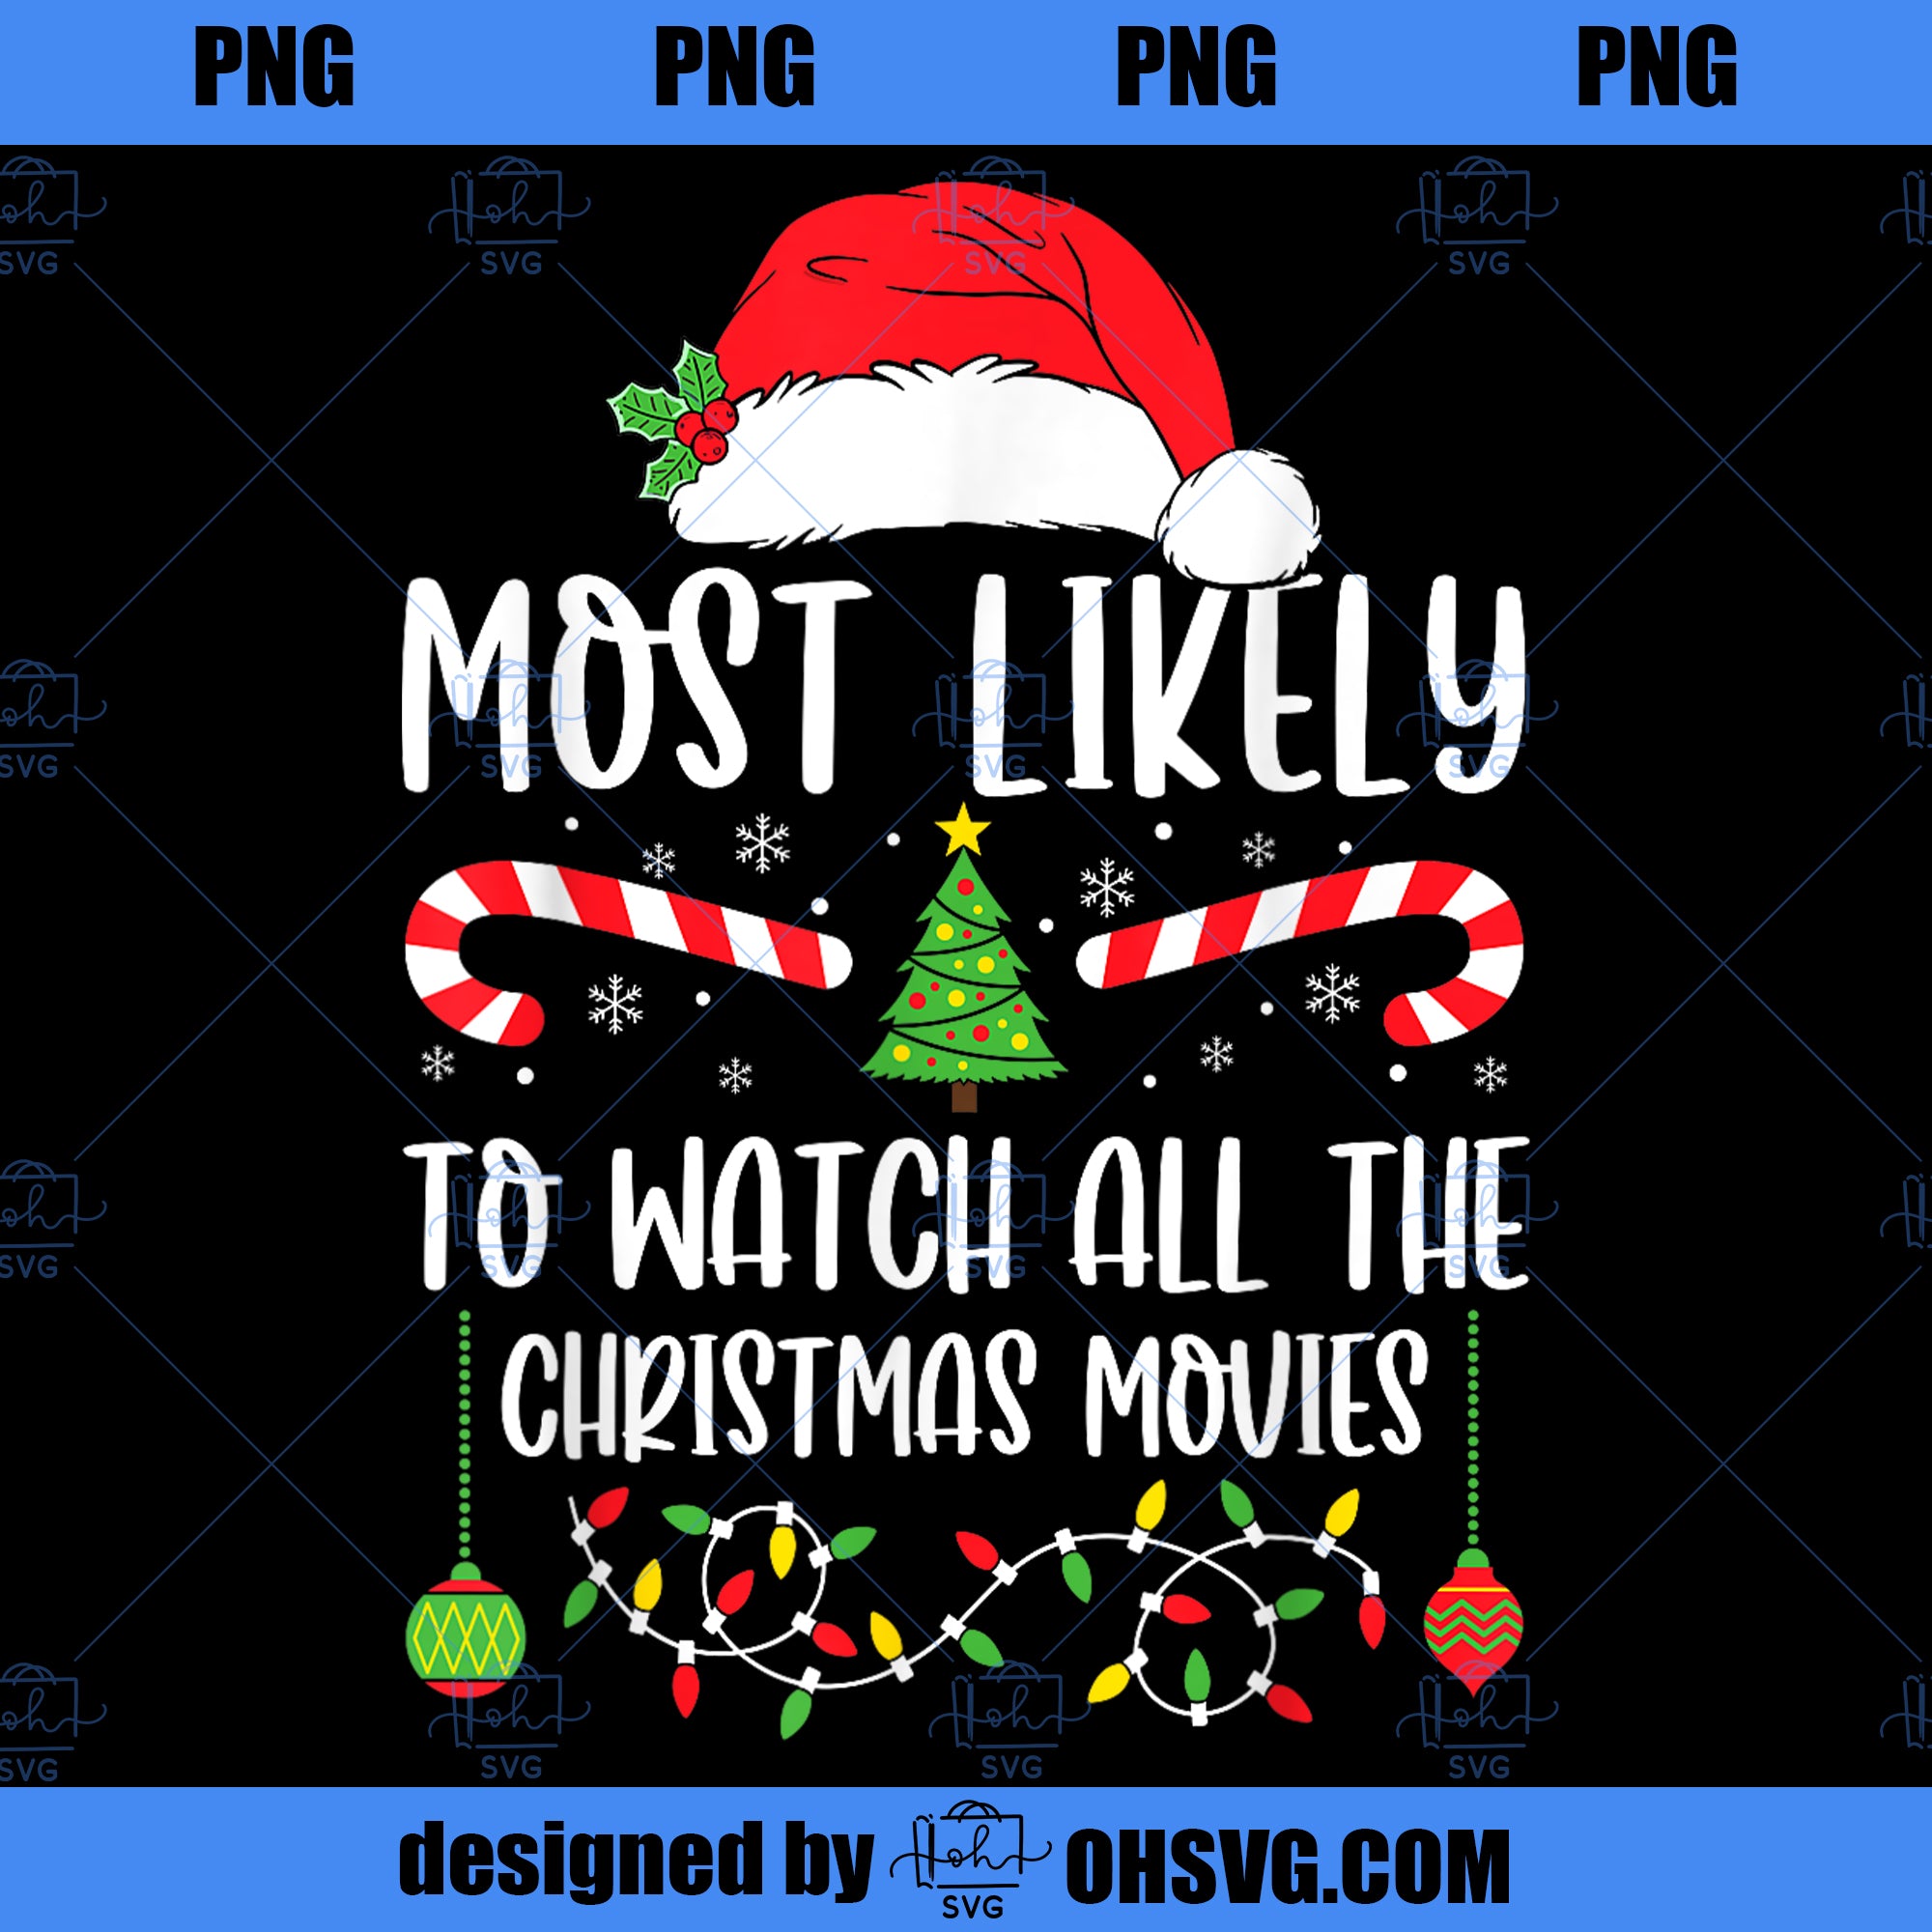 Most Likely To Watch All The Christmas Movies Xmas Matching PNG, Movies PNG, Movies Xmas PNG